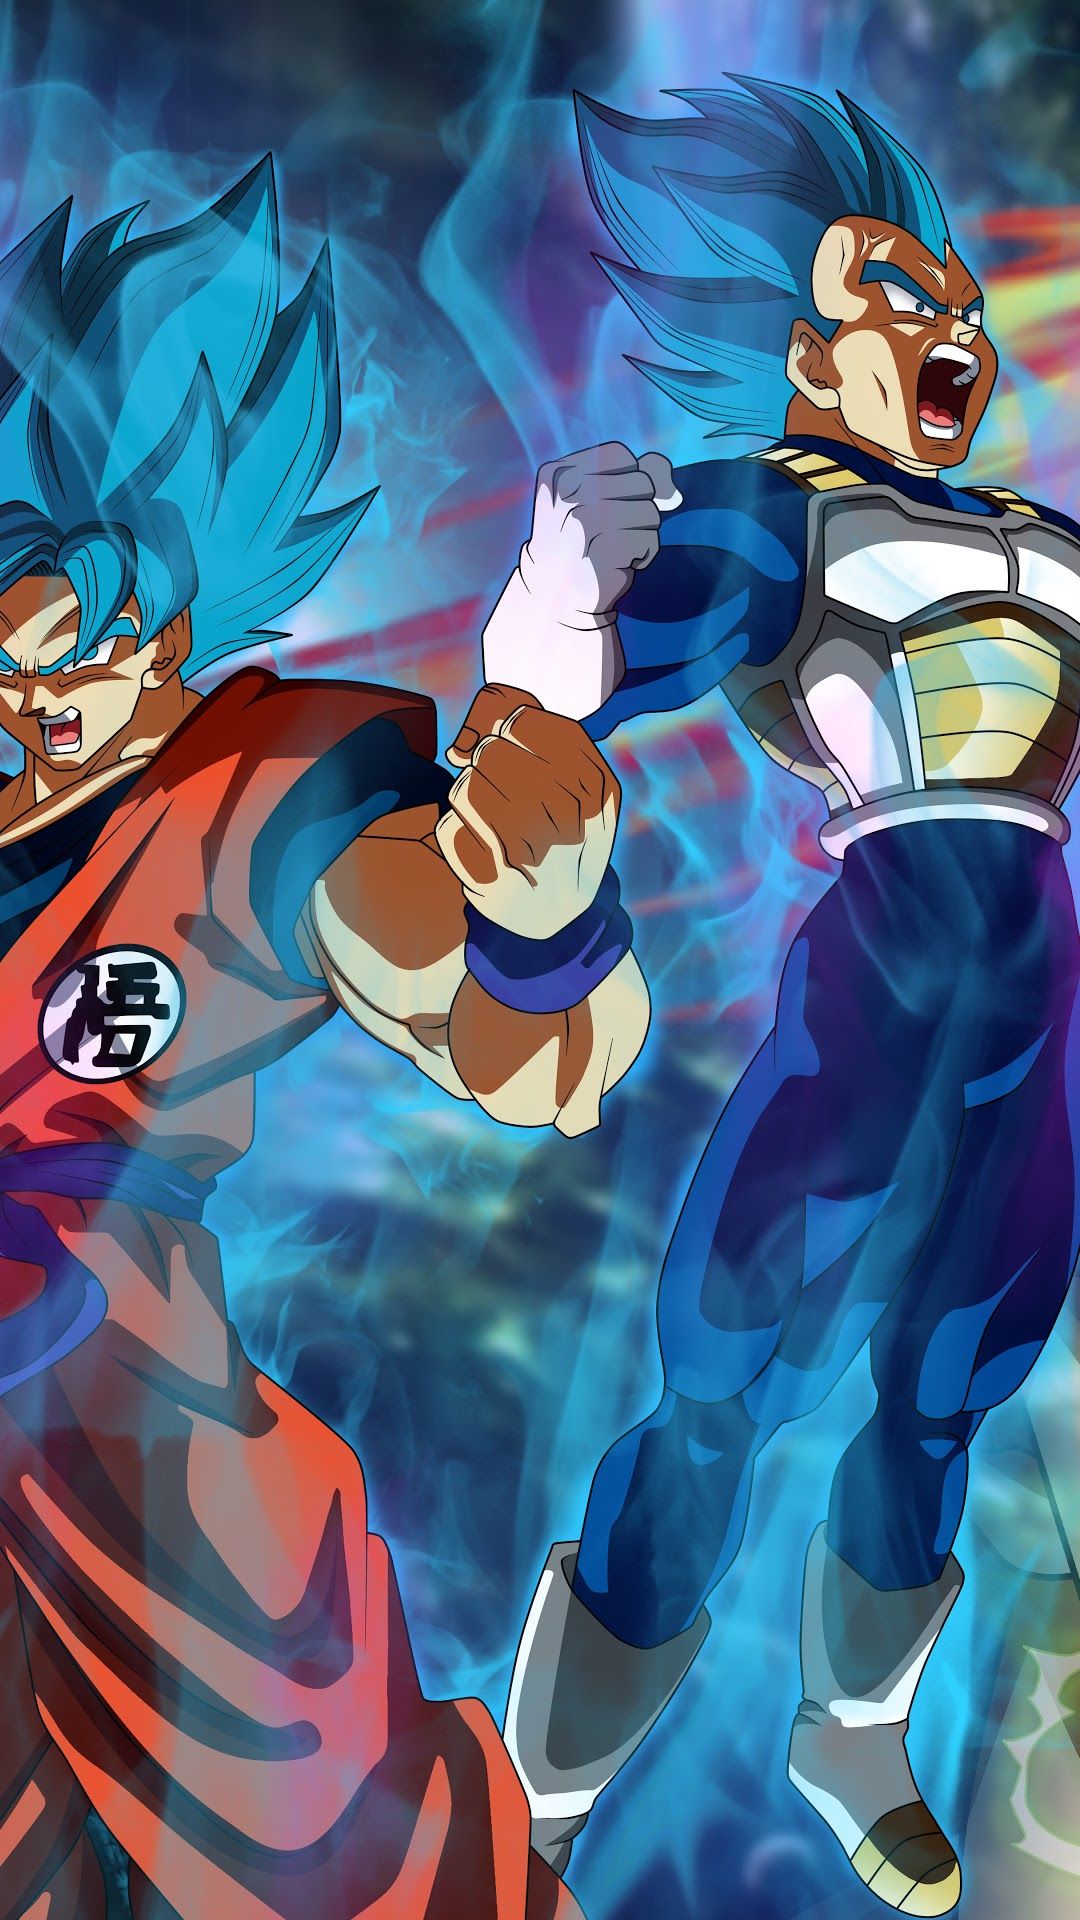 Dragon Ball Super: Broly, Goku, Vegeta, Broly phone HD Wallpaper, Image, Background, Photo and Picture HD Wallpaper